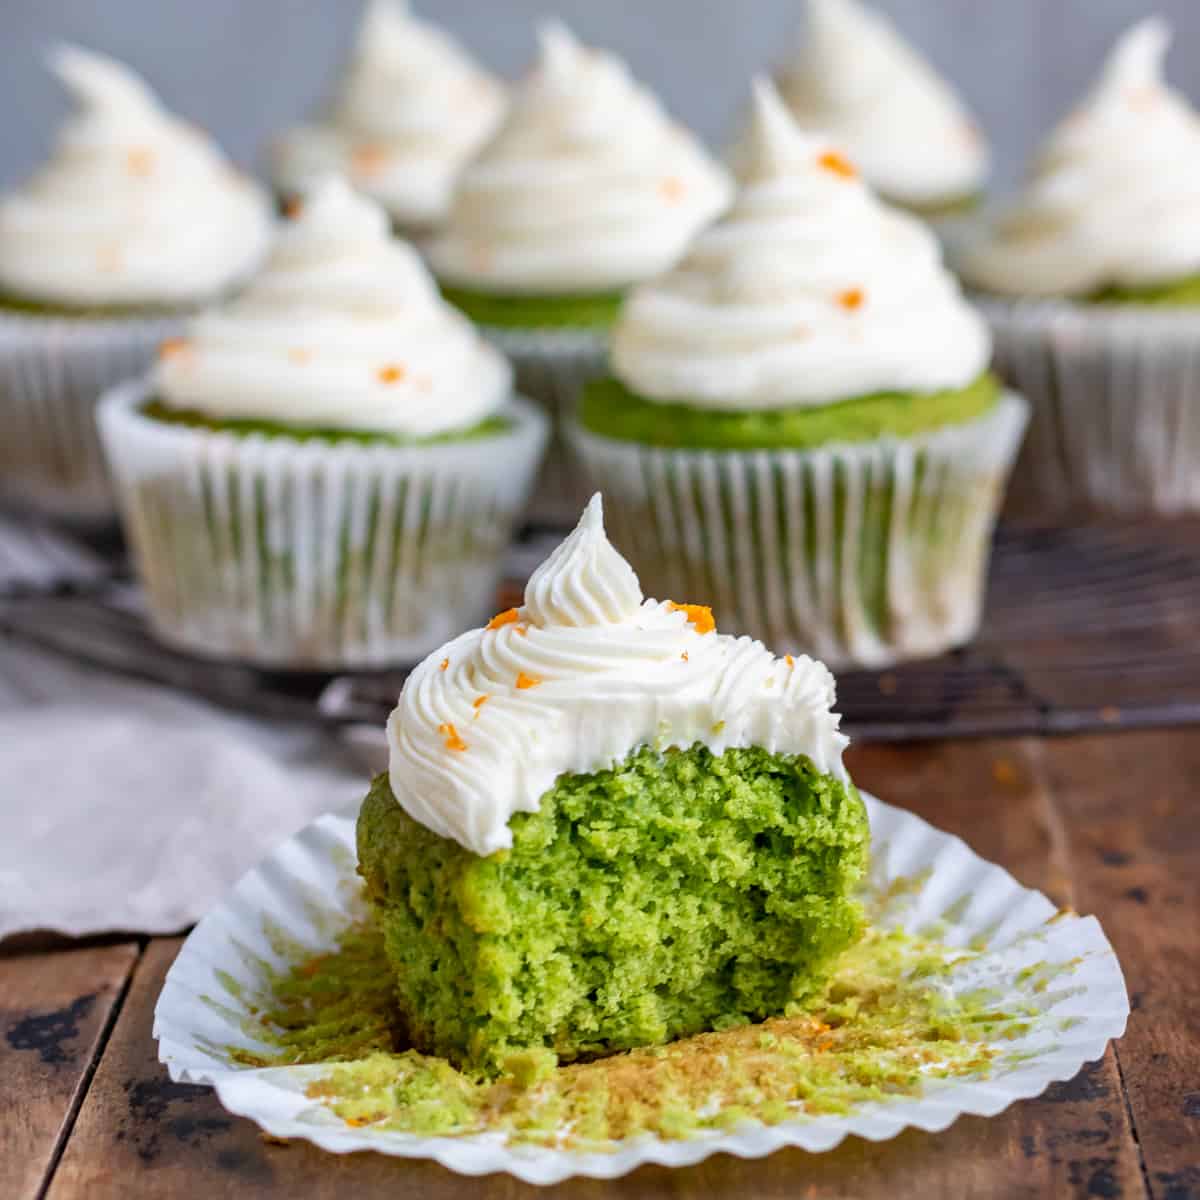 Try these Orange and Kale Cupcakes (you can't taste the kale!) top...